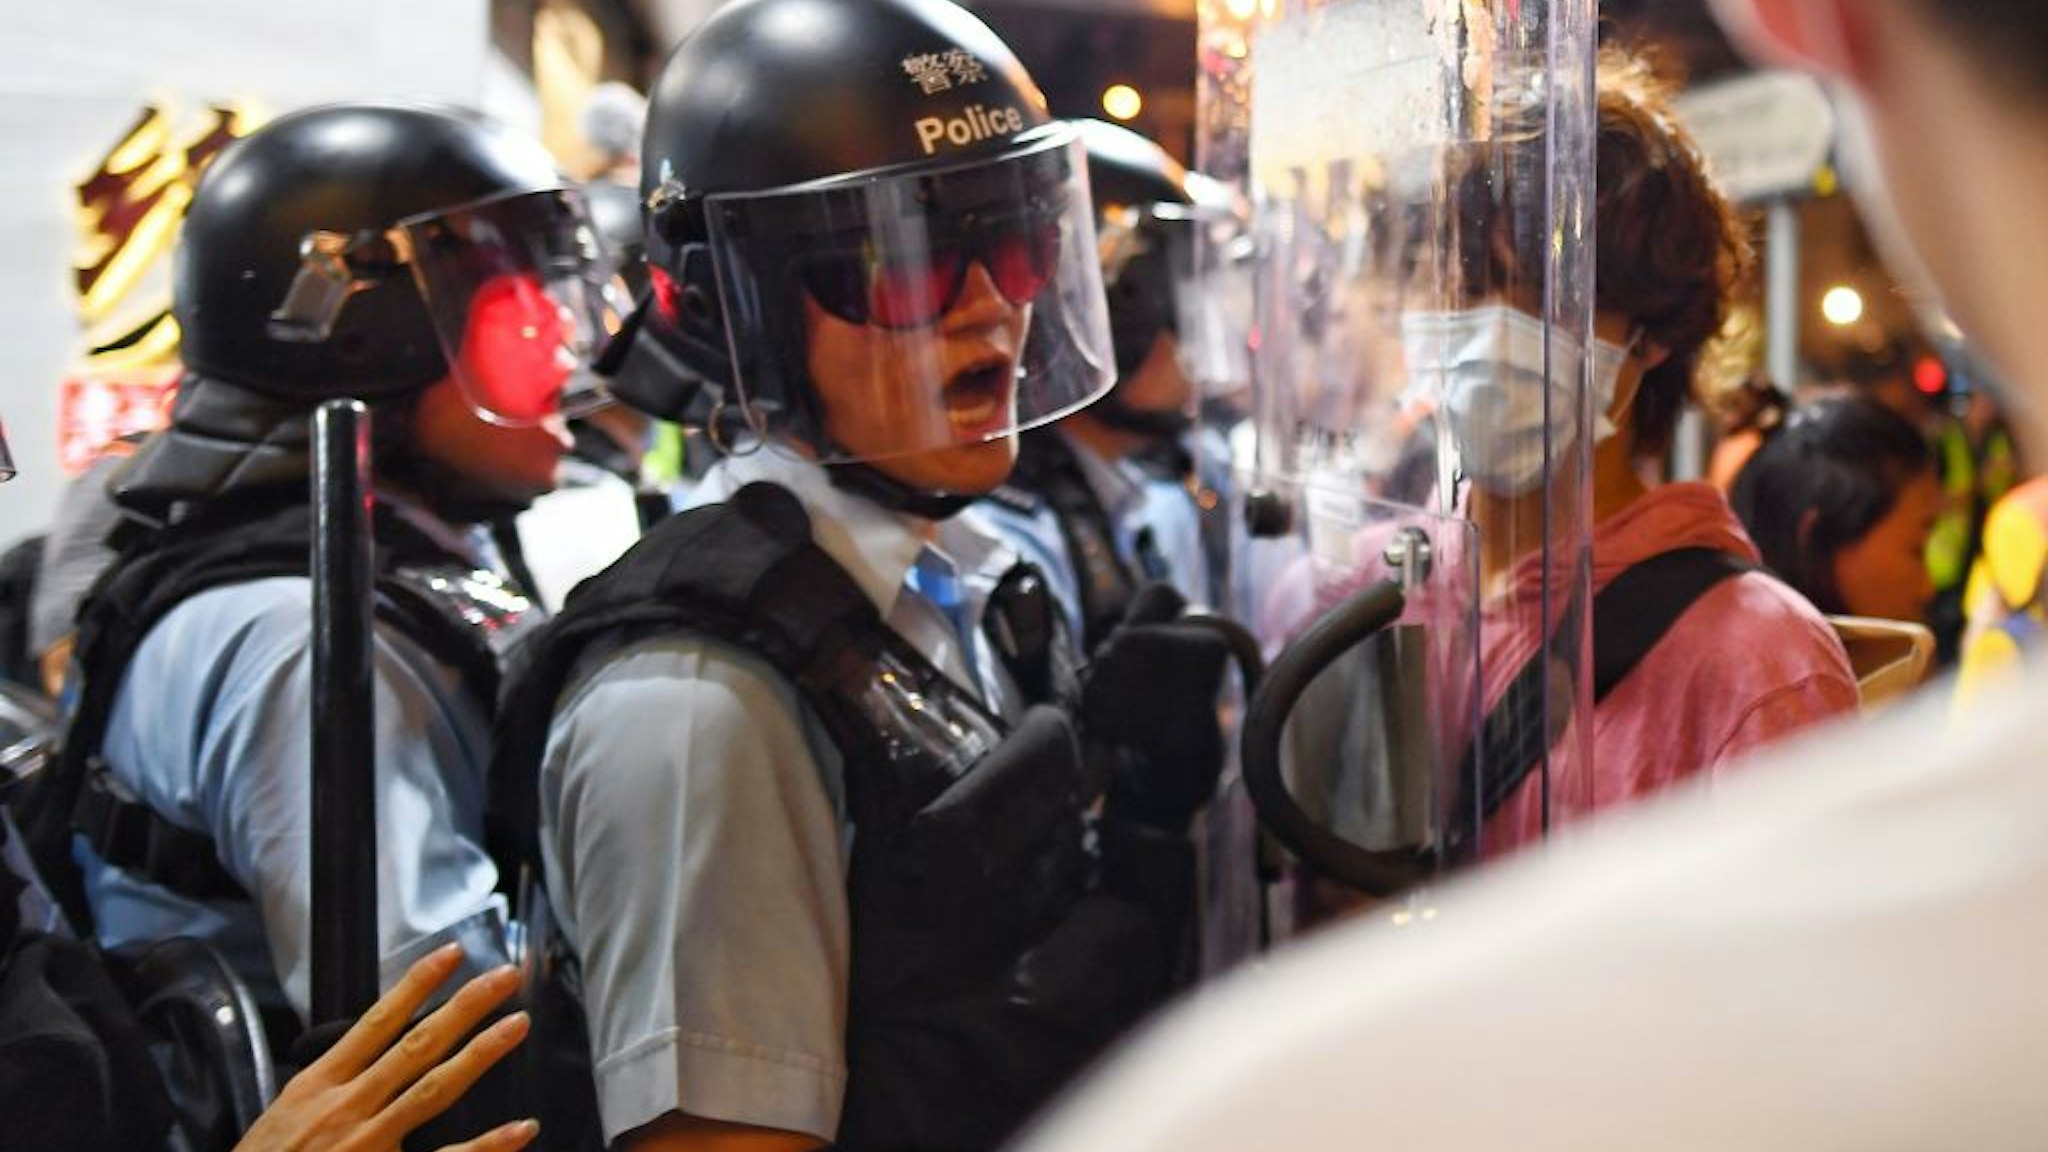 A Police man (L) shouts at a Pro-Democracy Protestor (R) to move out of his way during a gathering in the Sham Shui Po Area of Hong Kong on August 14, 2019. - More than 10 weeks of sometimes-violent demonstrations have wracked the semi-autonomous city, with millions taking to the streets to demand democratic reforms and police accountability.